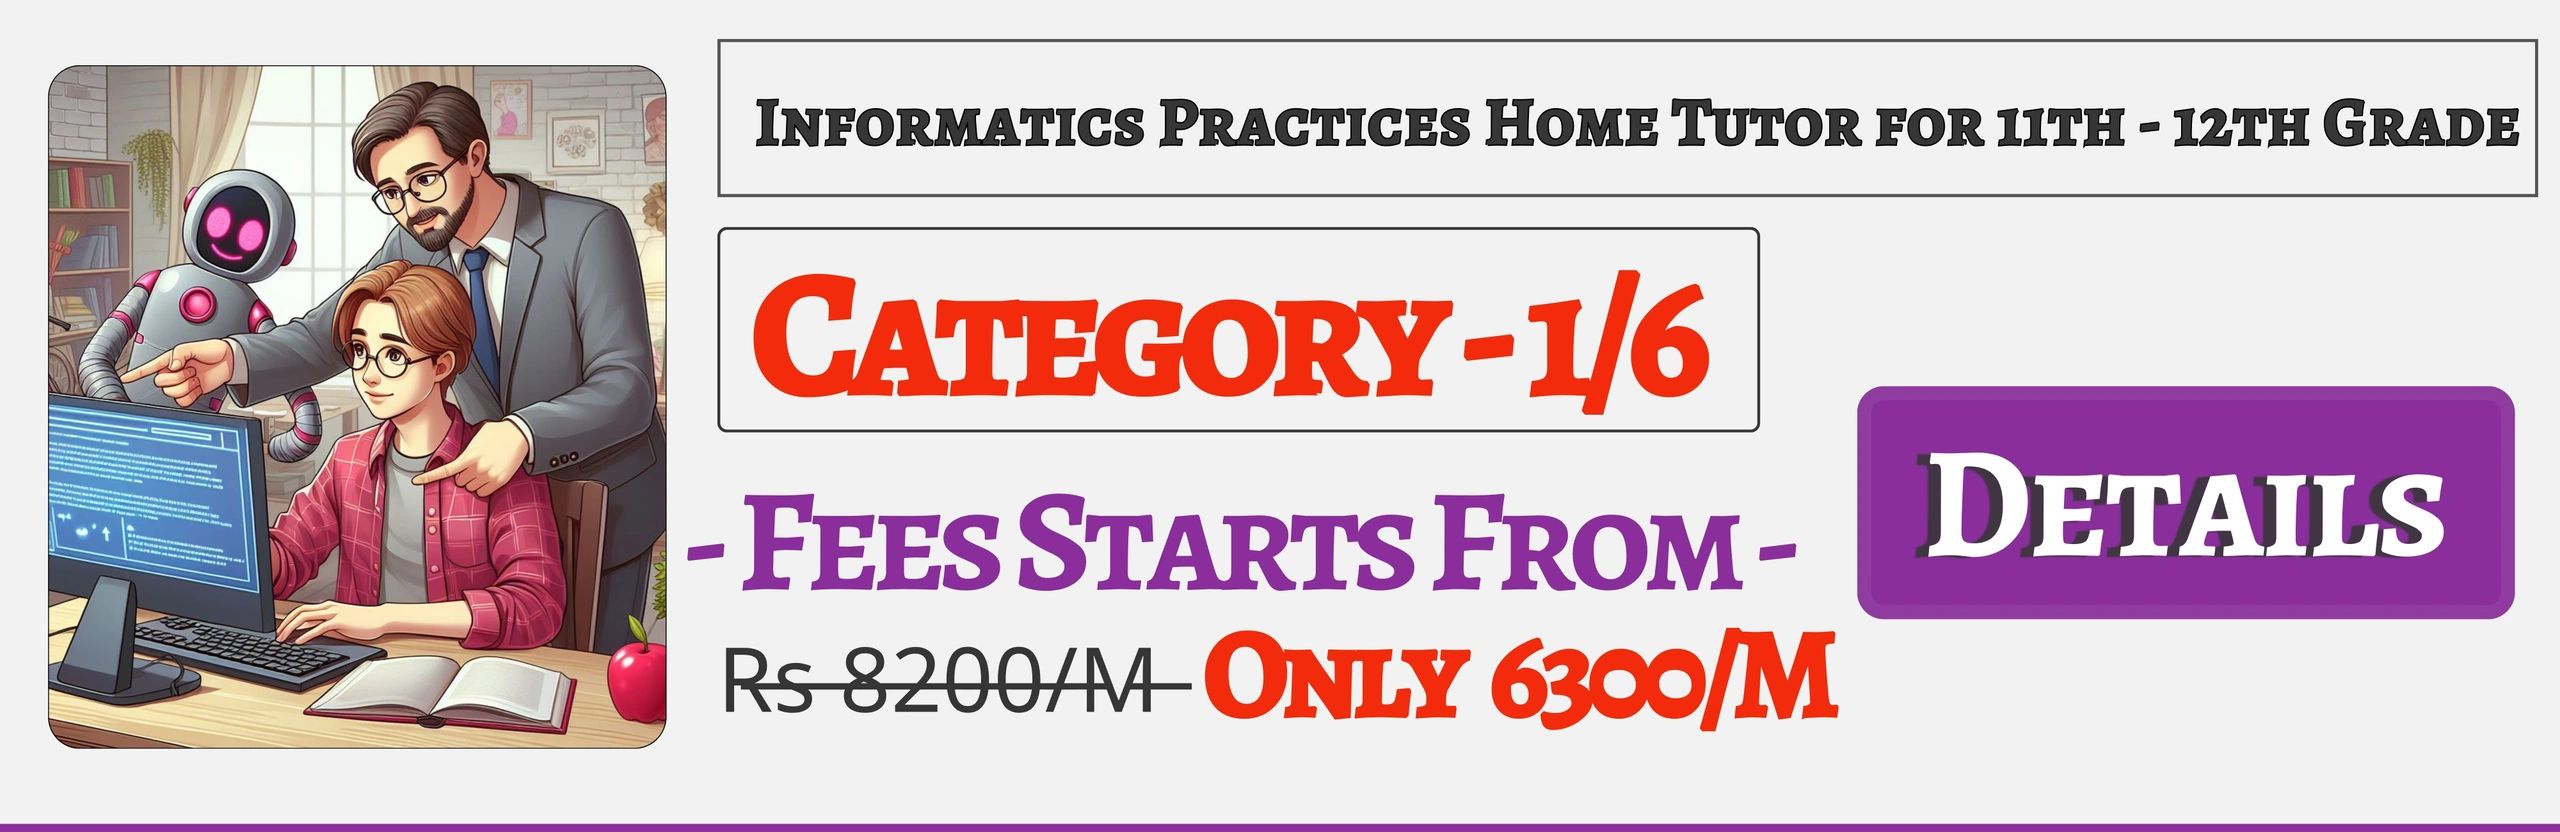 Book Best Nearby Informatics Practices Home Tuition Tutors For 11th & 12th Jaipur ,Fees Only 6300/M